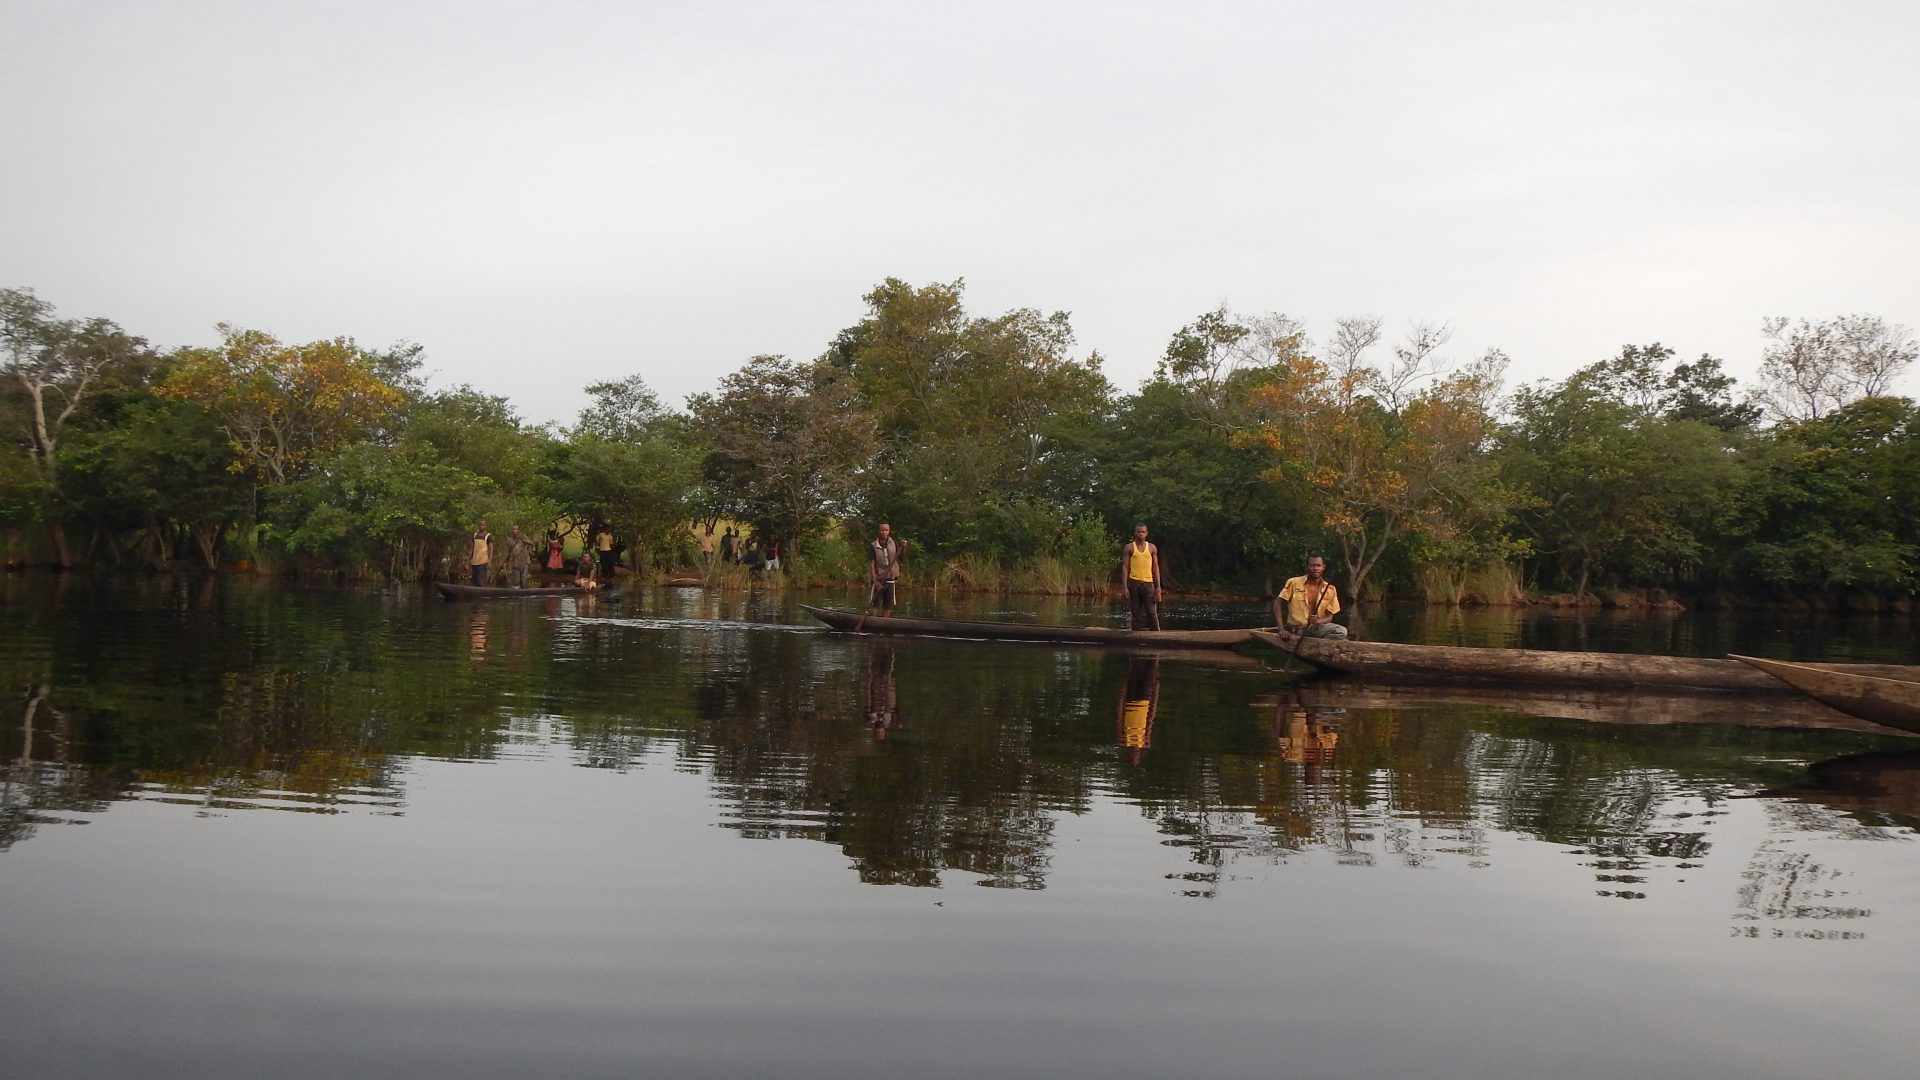 Local community forest concession members standing in canoes over the water, forest can be seen in the background.